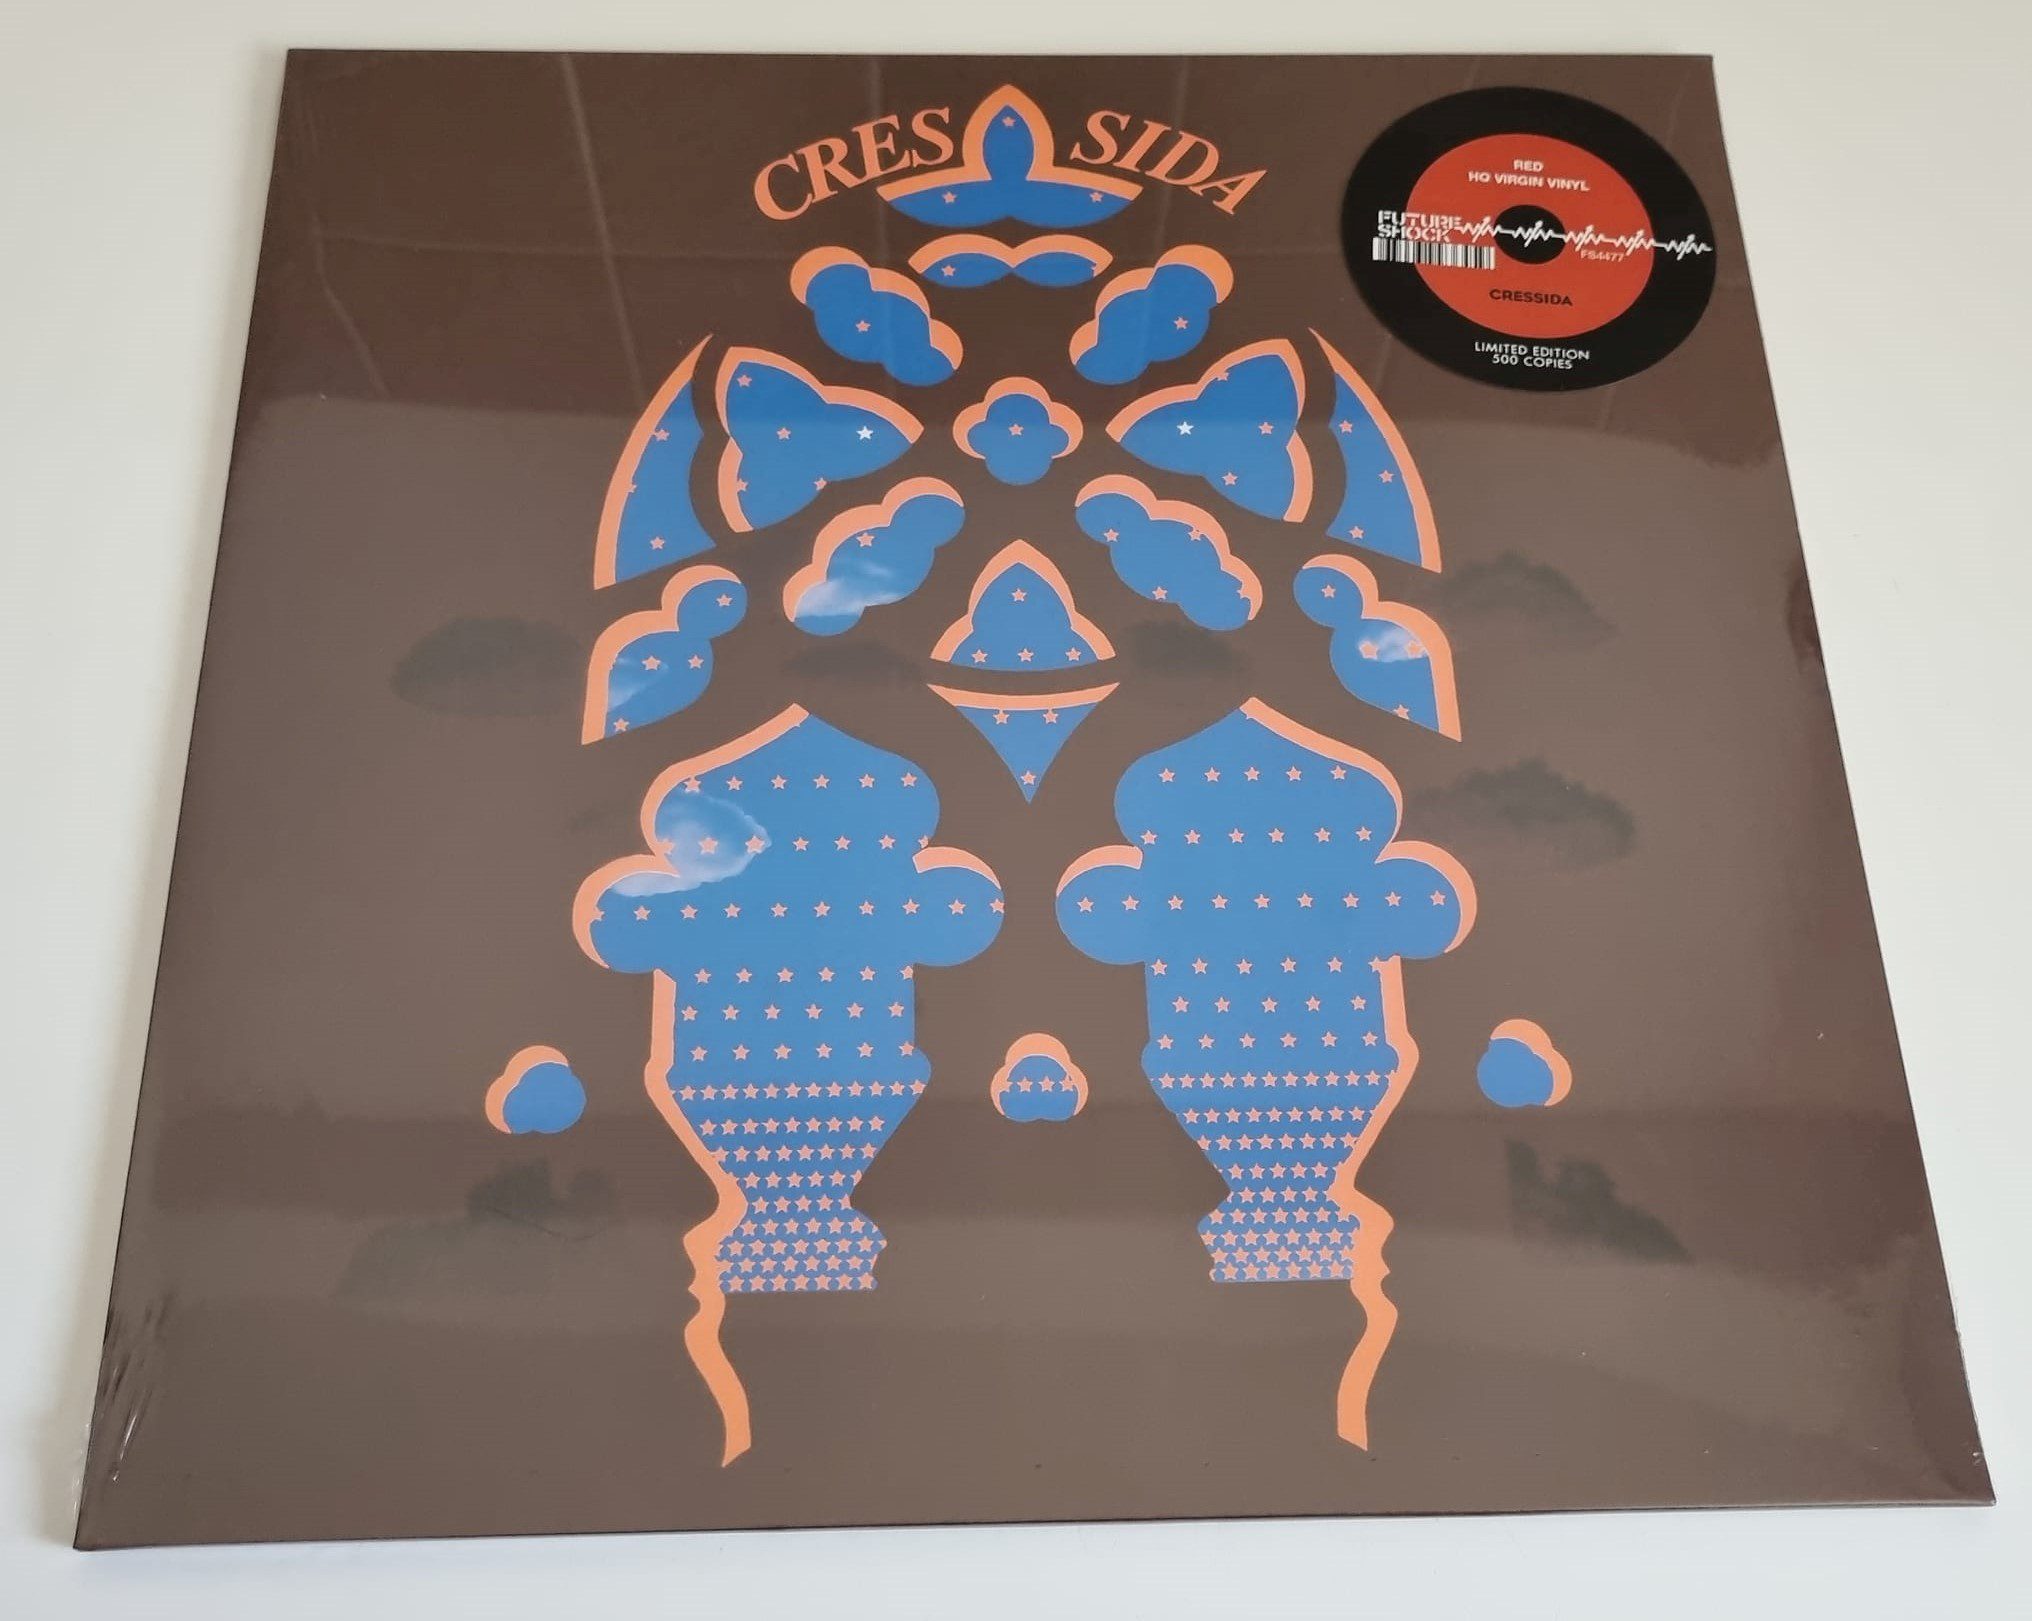 Buy this rare Cressida record by clicking here